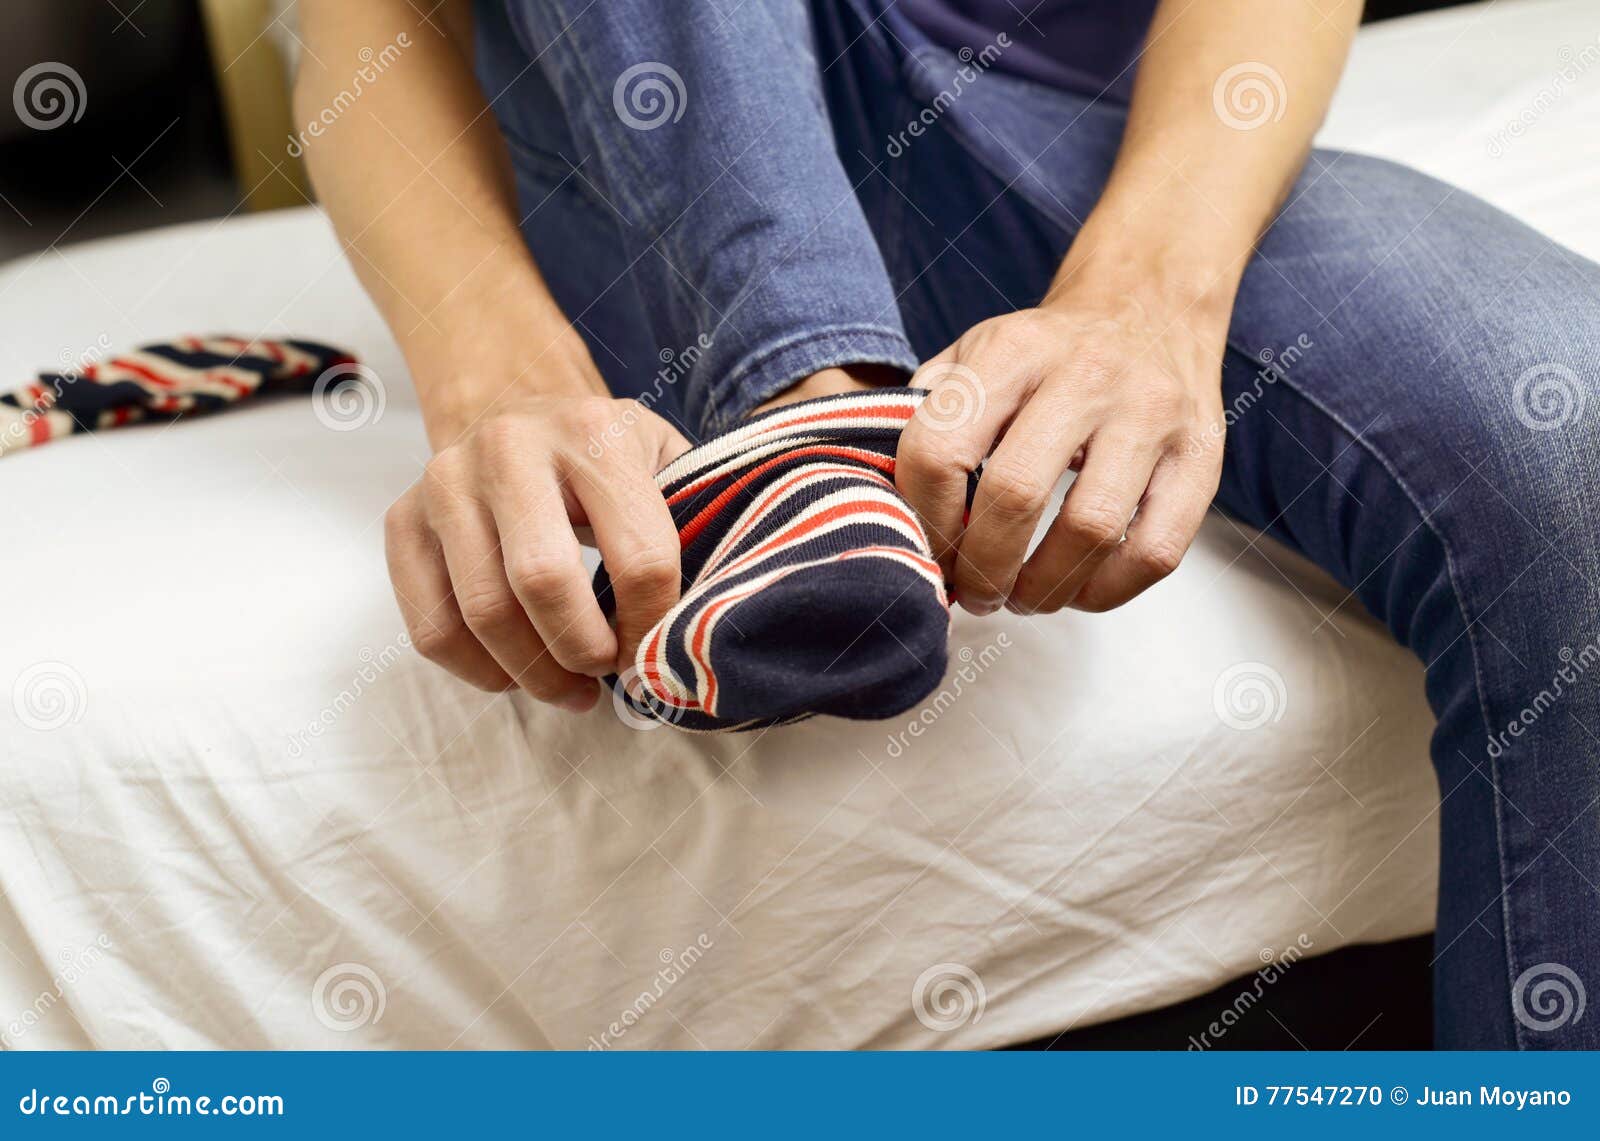 young-man-putting-on-or-taking-off-his-socks-stock-photo-image-of